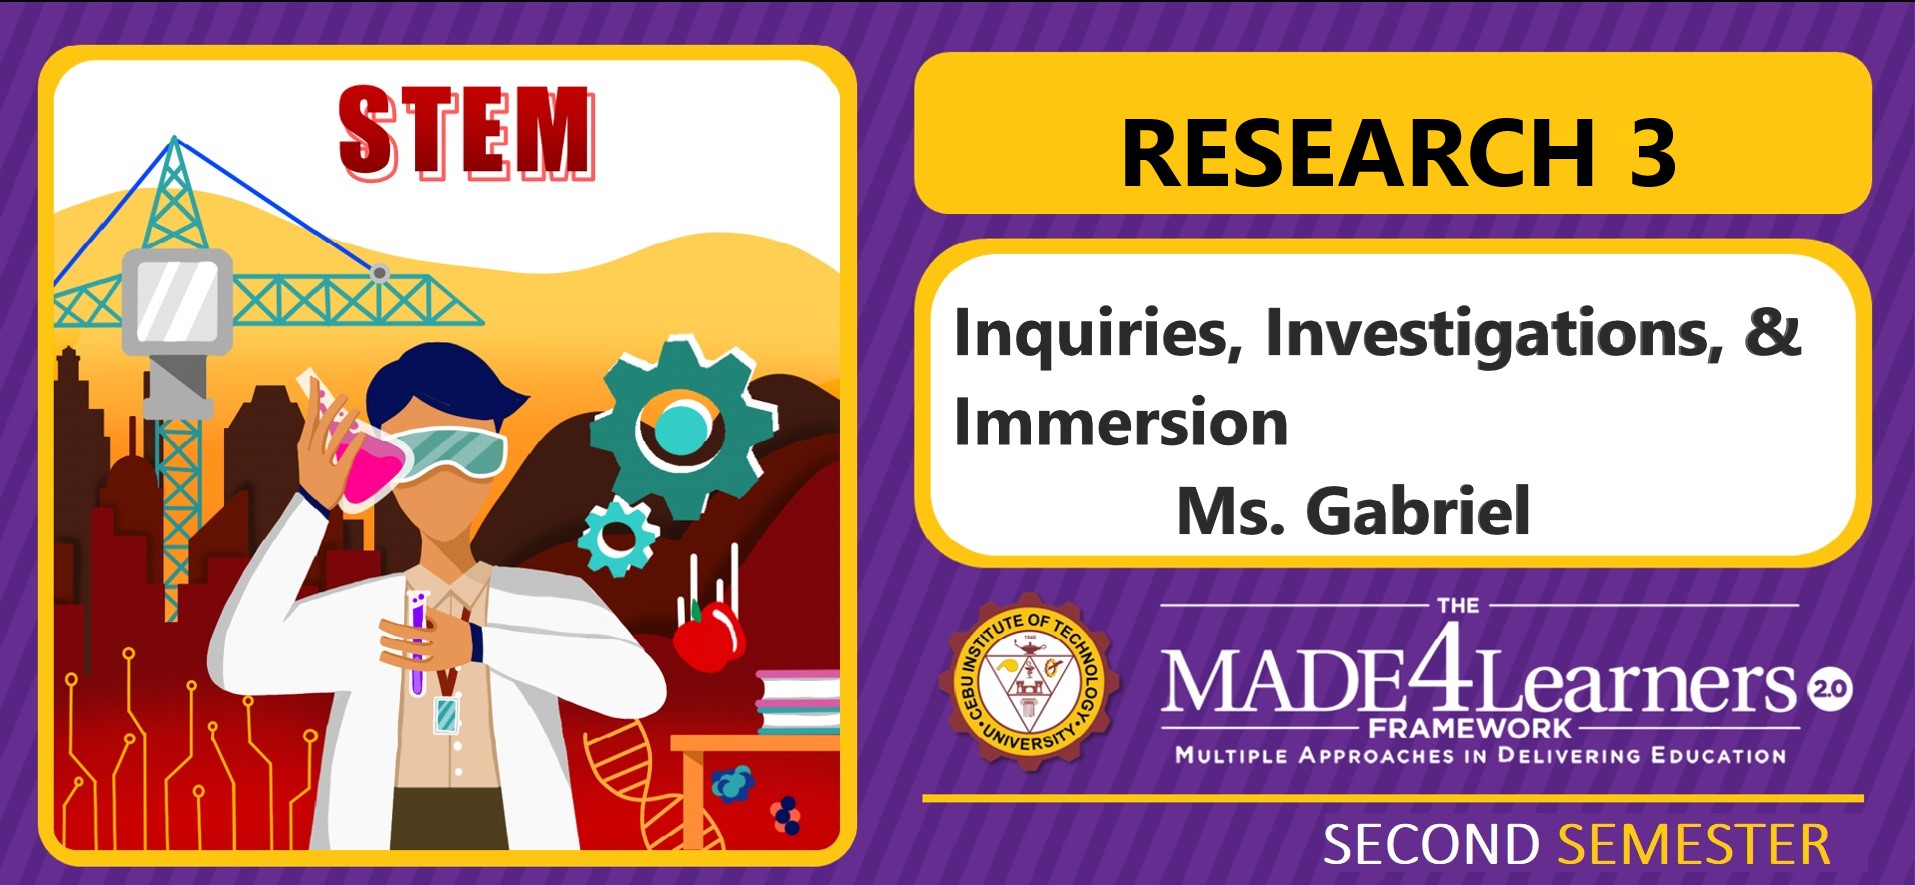 RES3: Research Inquiries, Investigation and Immersion (Gabriel)